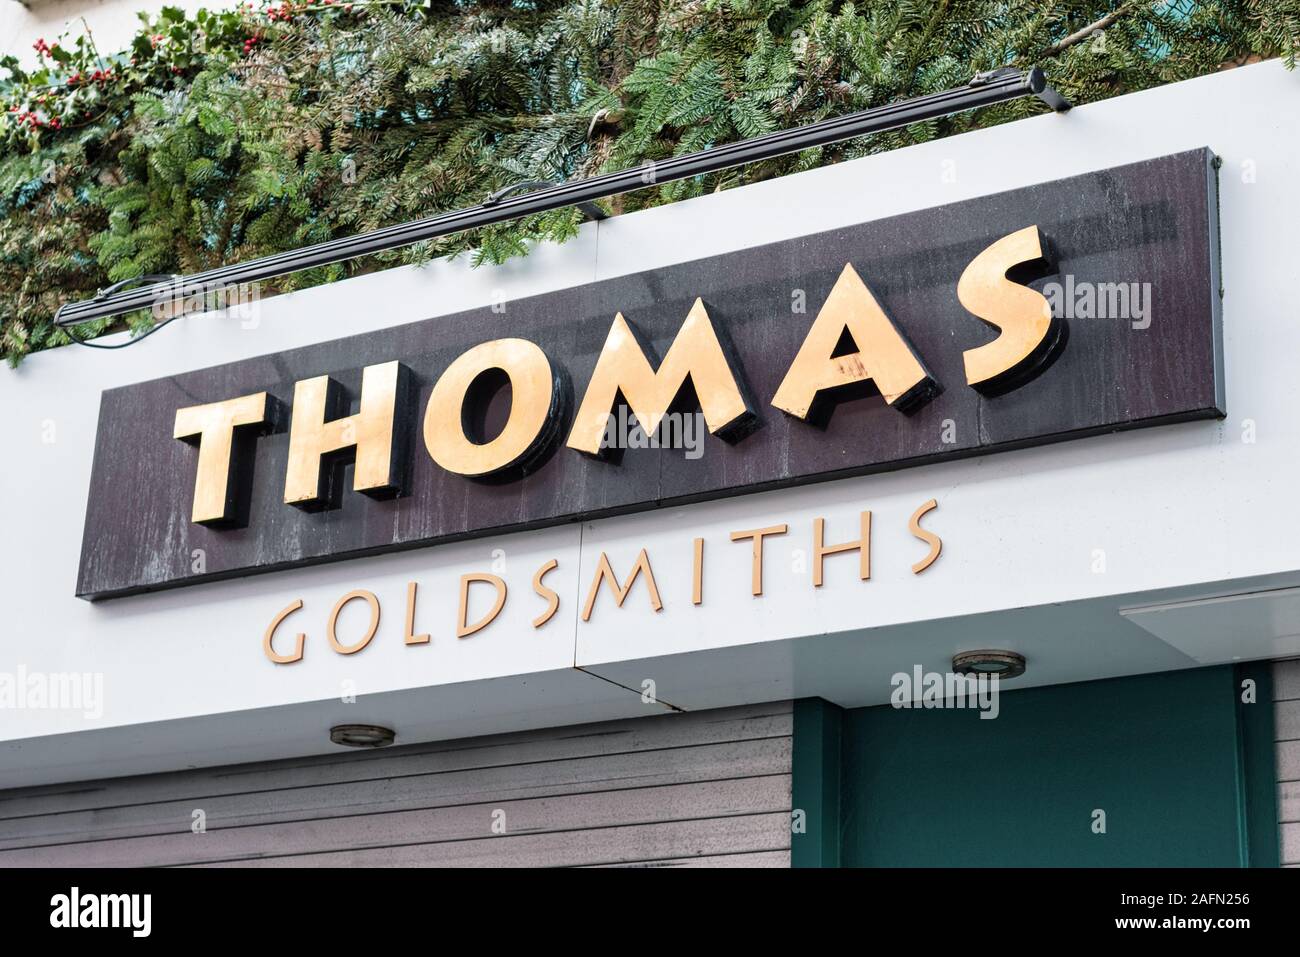 Derry, N. Ireland -Dec 15, 2019: The sign outside Thomas Goldsmiths in Derry, Northern Ireland Stock Photo